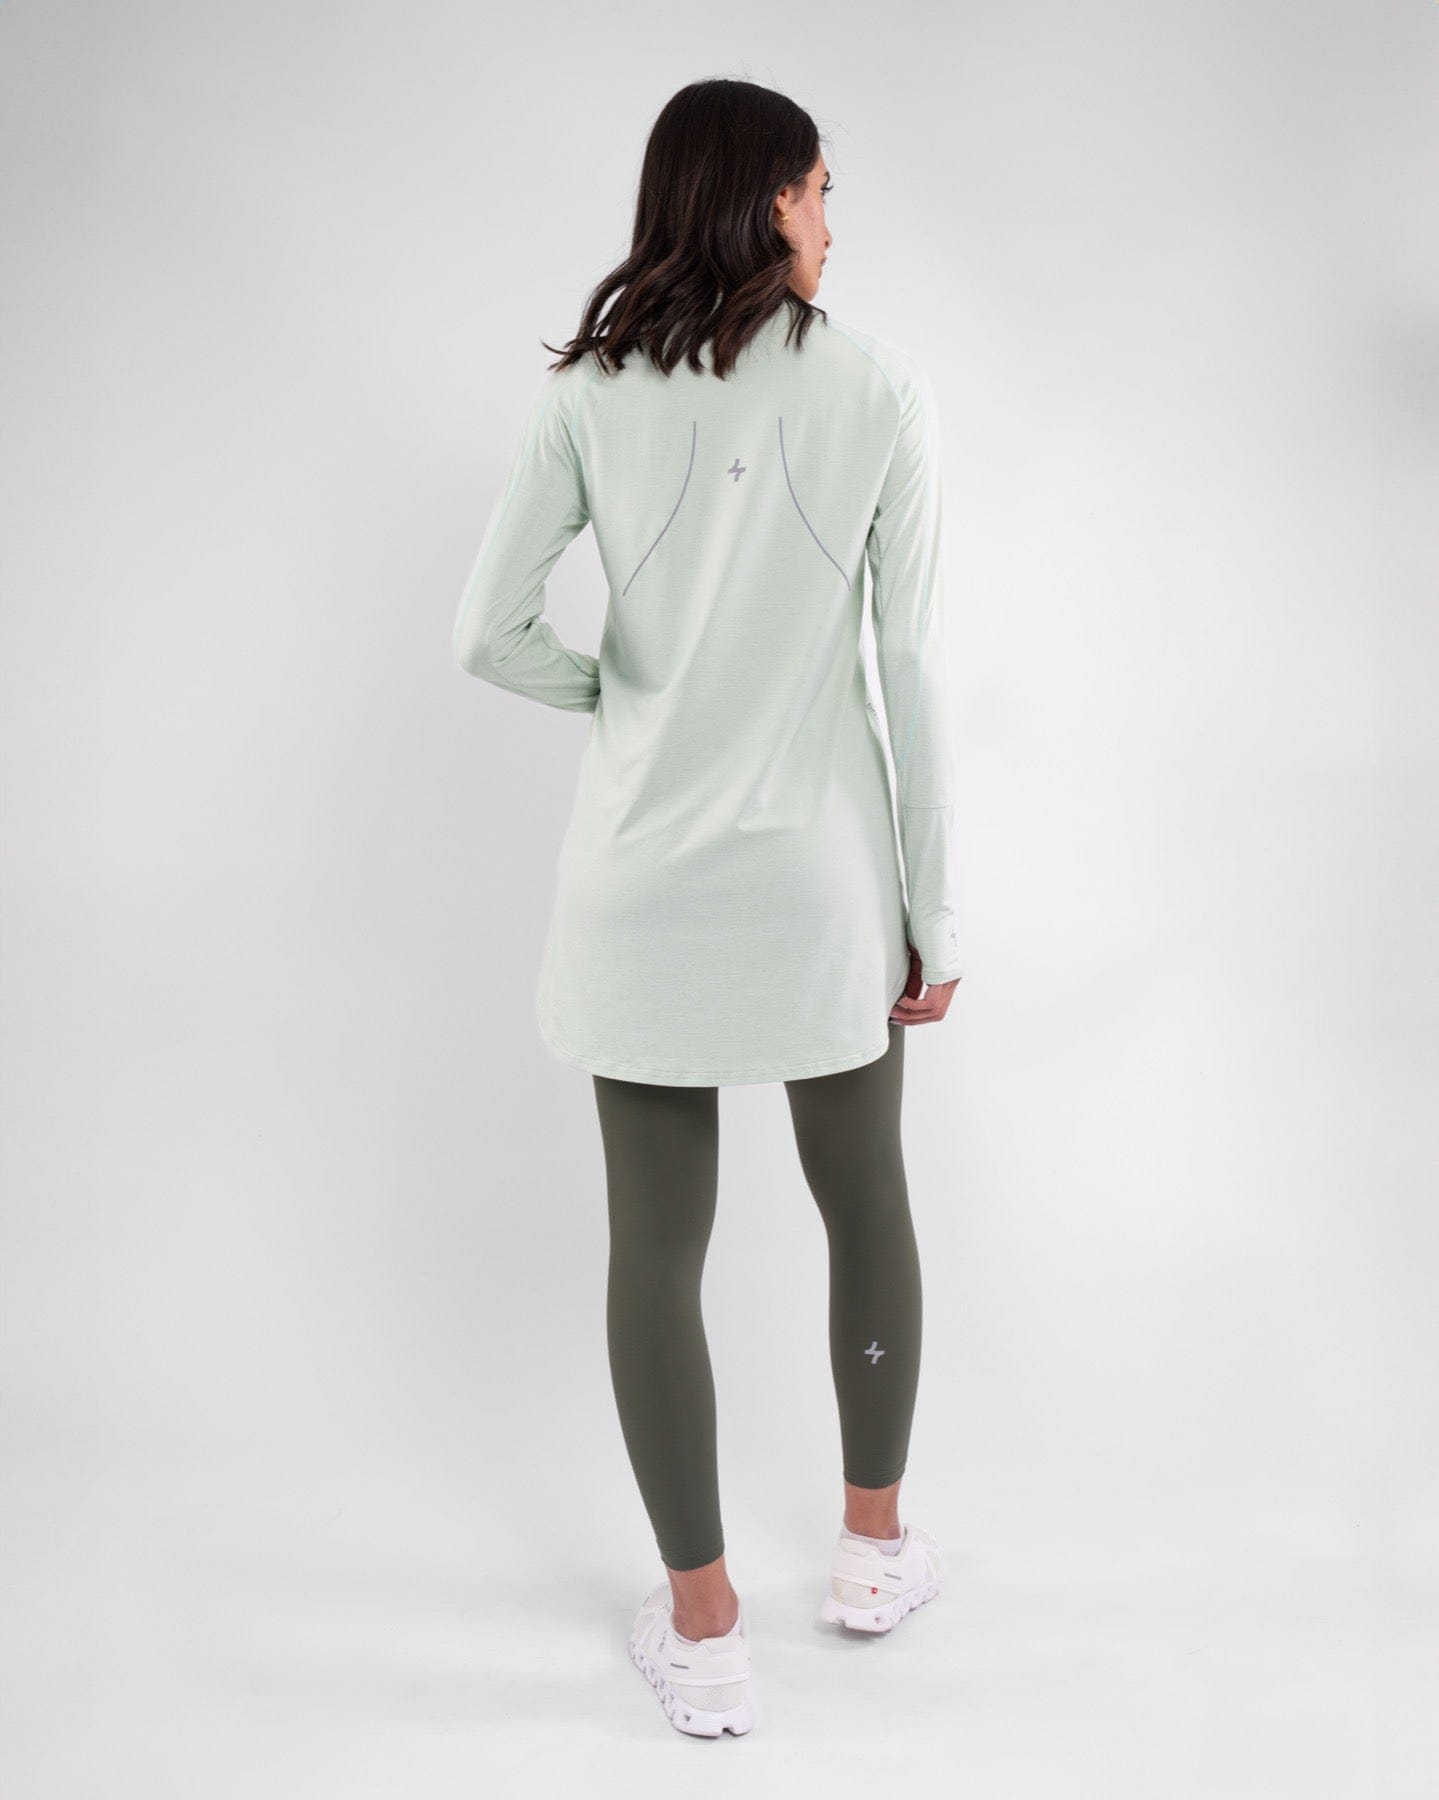 Woman posing in a light green, lightweight long-sleeve modest activewear top with cooling fabric technology and dark green, moisture-resistant leggings with a logo, paired with white sneakers, against a neutral background.